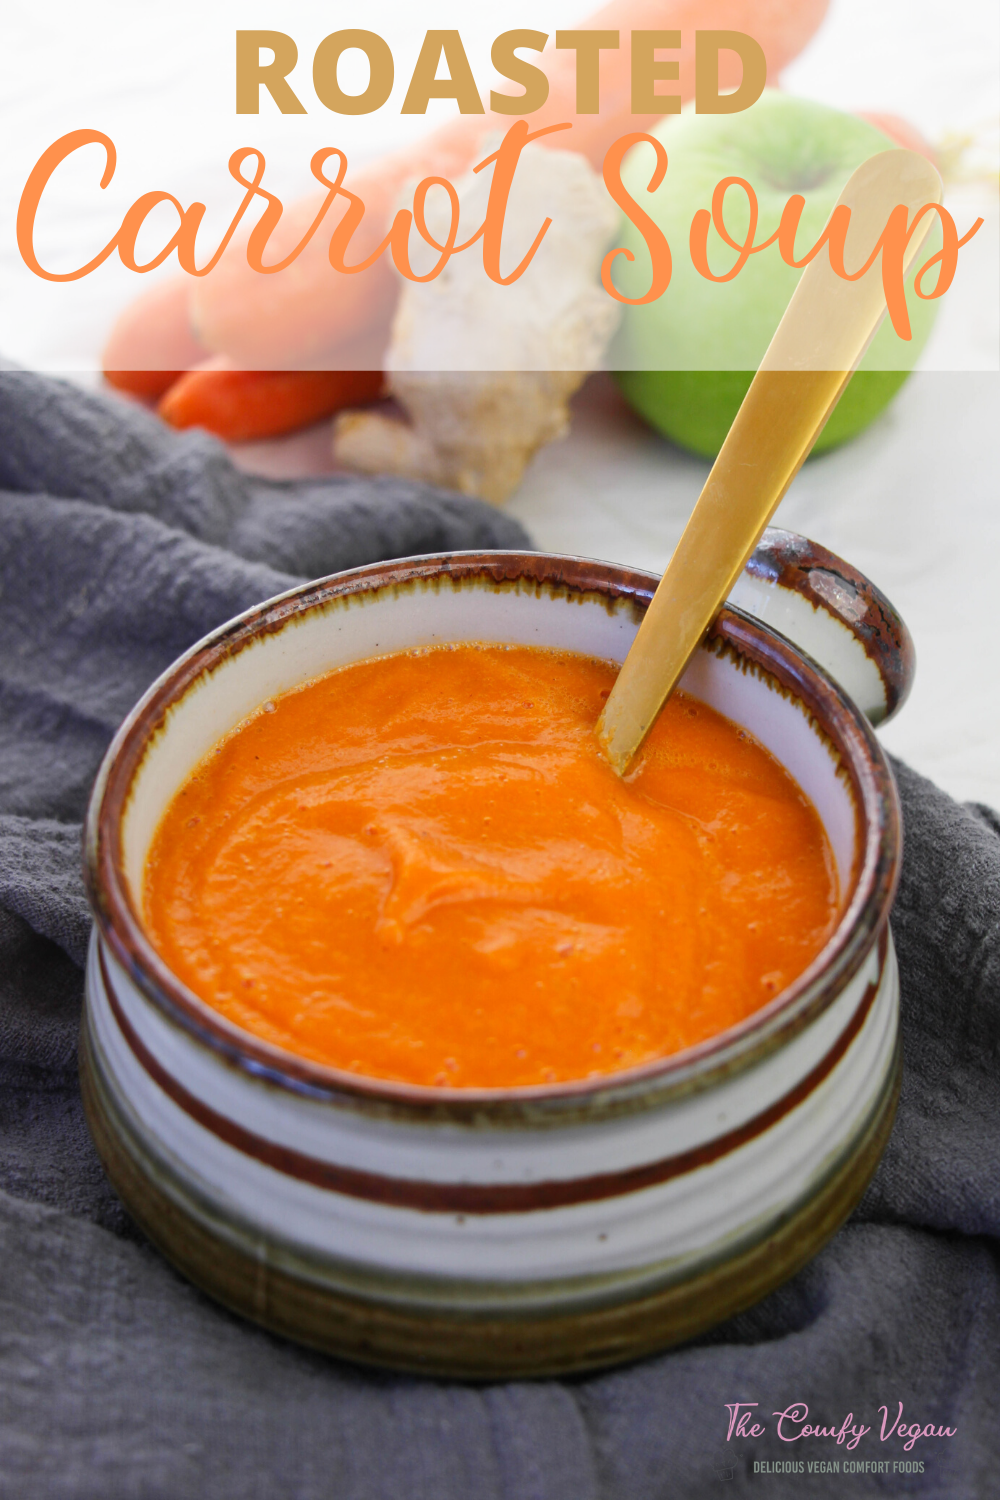 This roasted carrot soup recipe is so good and so simple to make. You'll love the fresh taste and bright color of this delicious comfort soup!